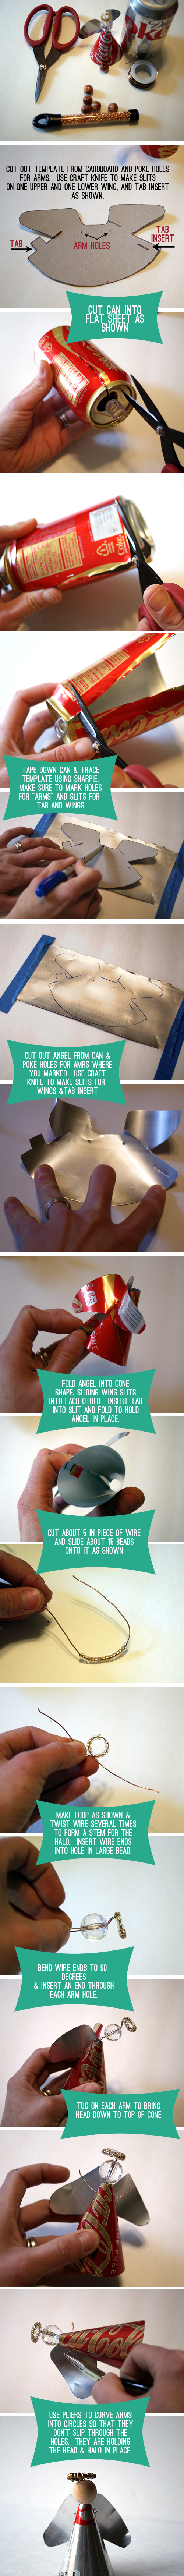 Make #Recycled Aluminum Can Angel Ornaments #ChristmasDecor #Upcycle @savedbyloves